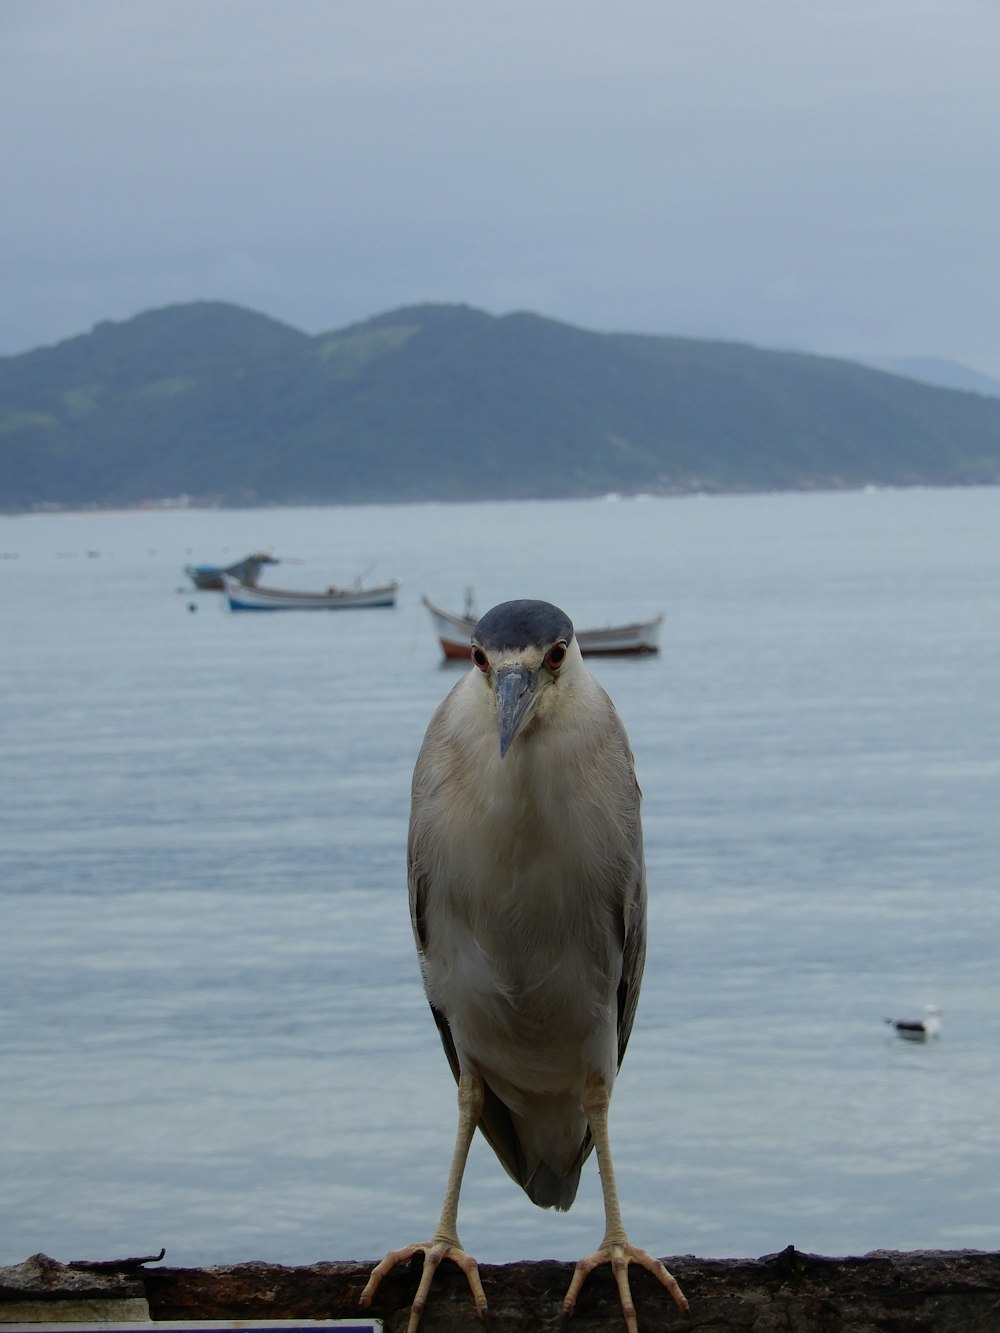 a bird is standing on a ledge near the water